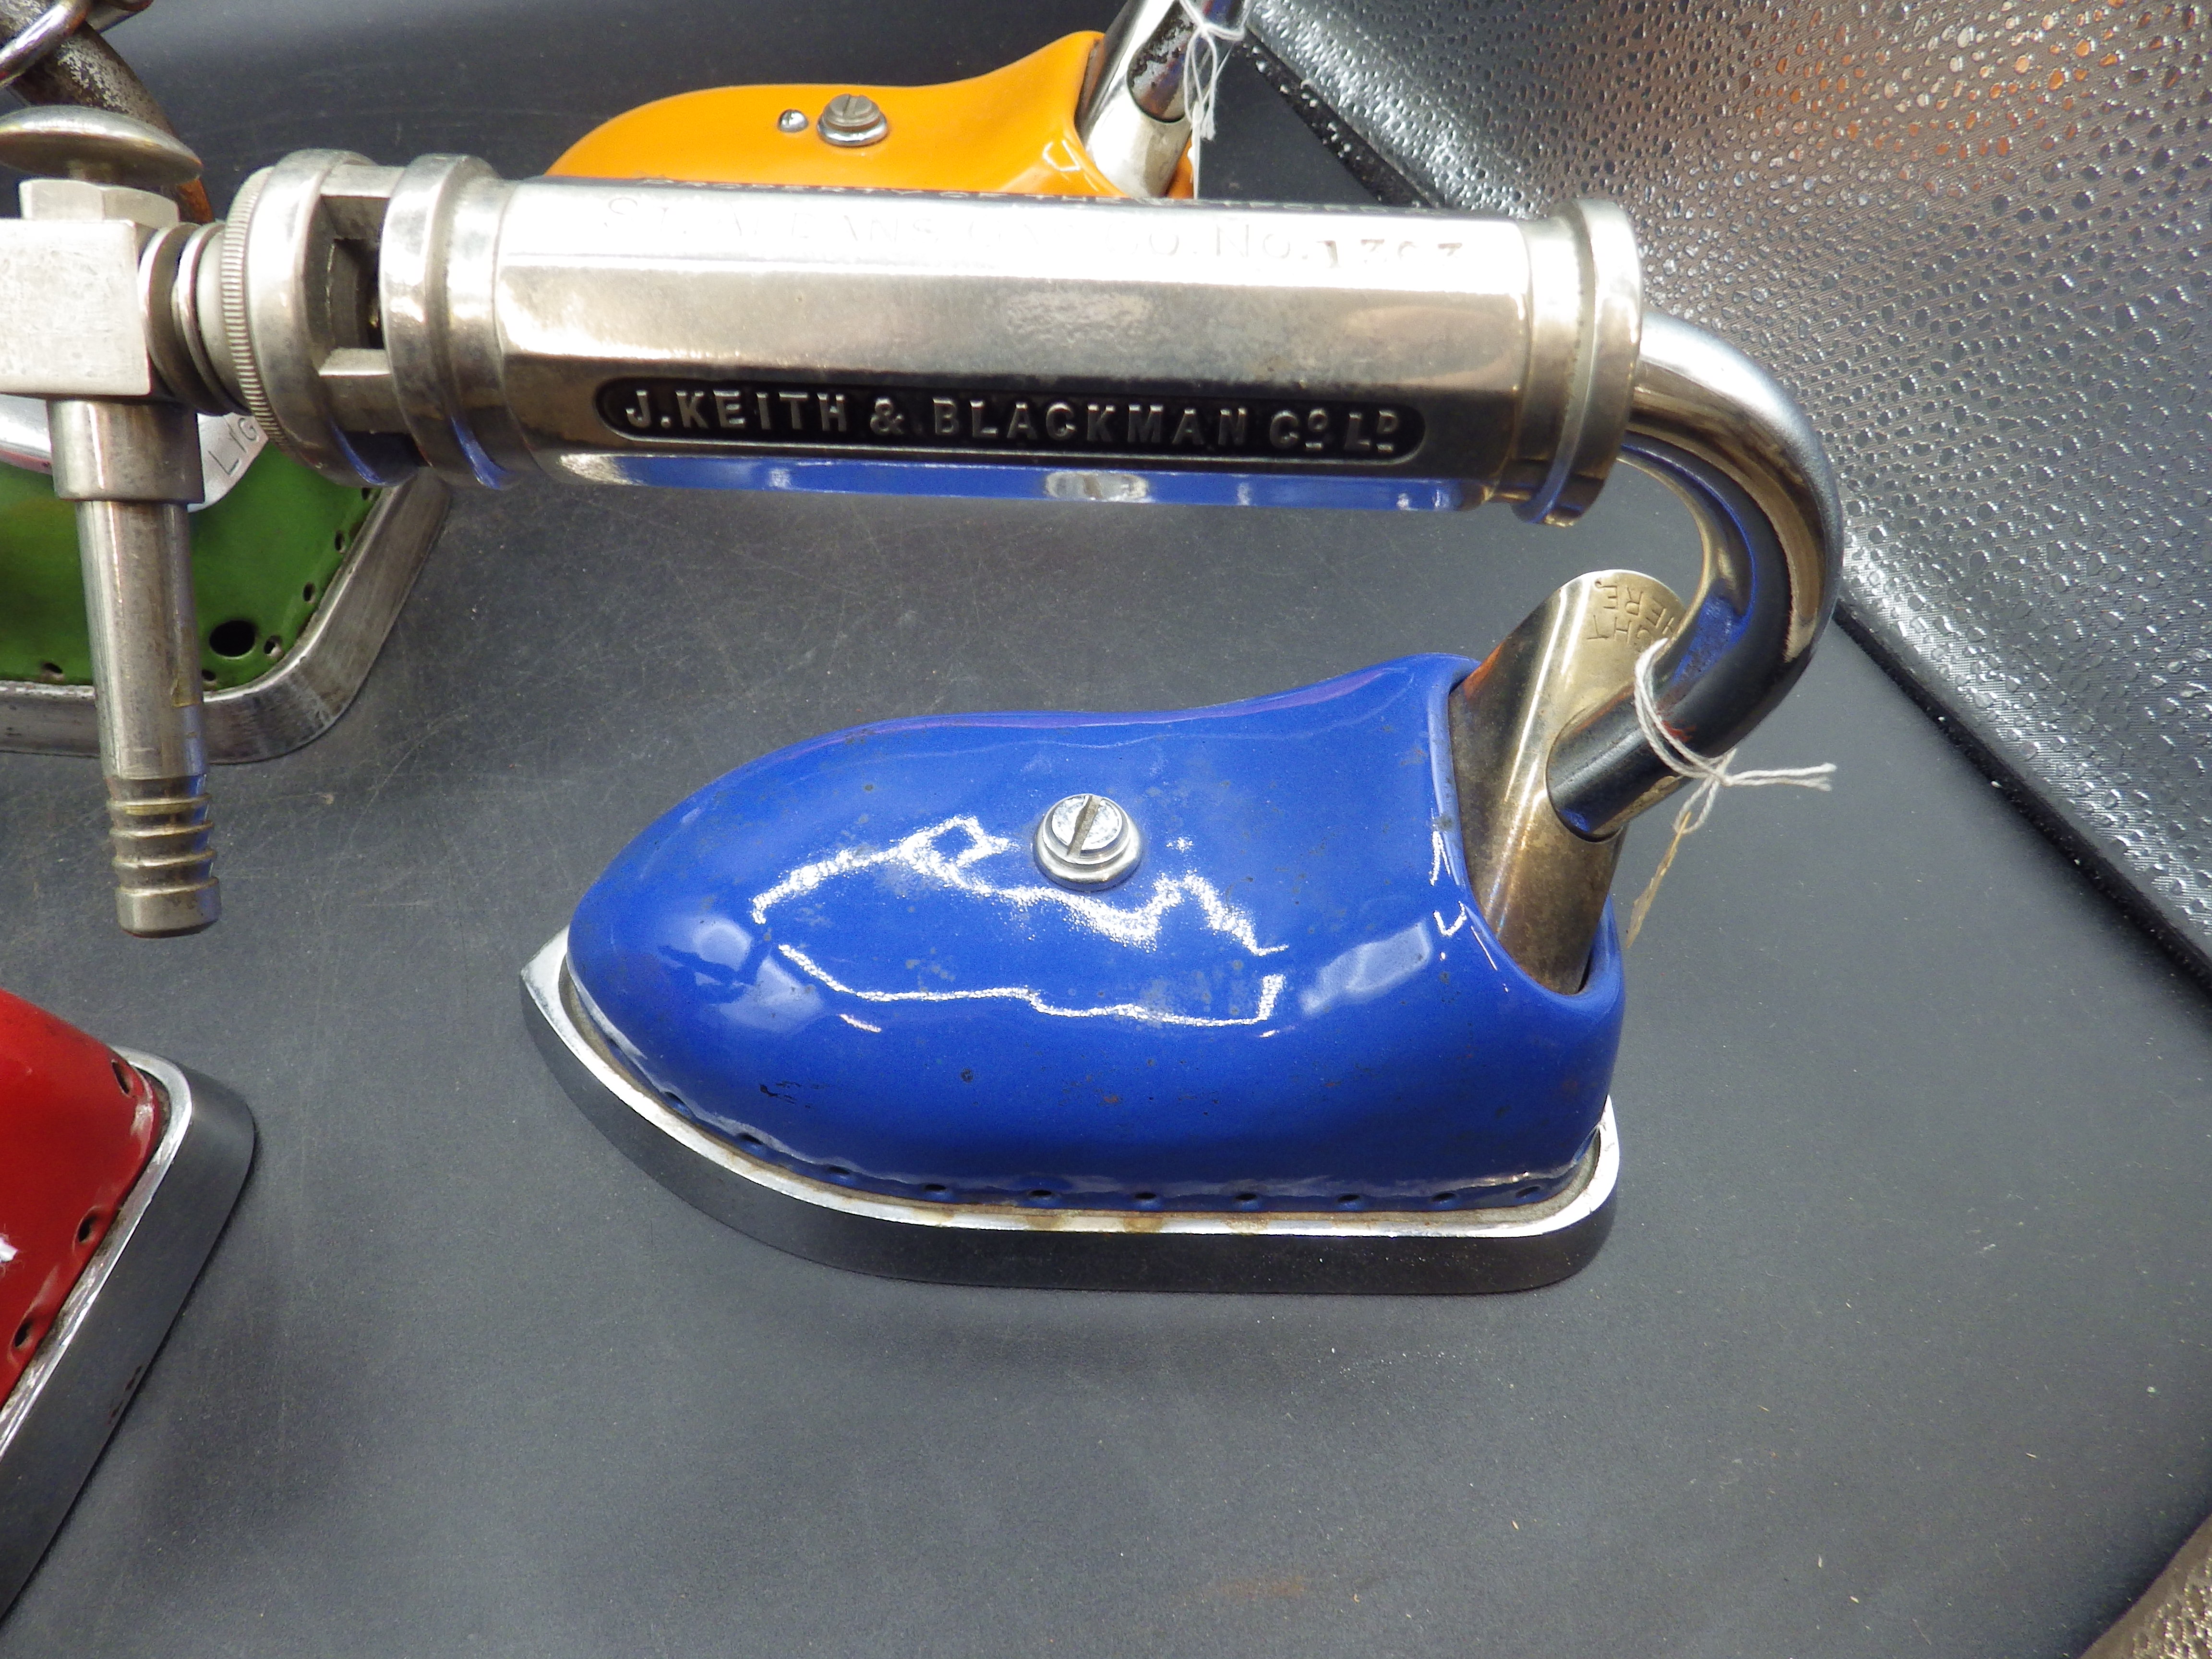 4 J Keith & Blackman Co Ltd patent 360555 coloured enamel irons in red, green, blue and orange - Image 3 of 3